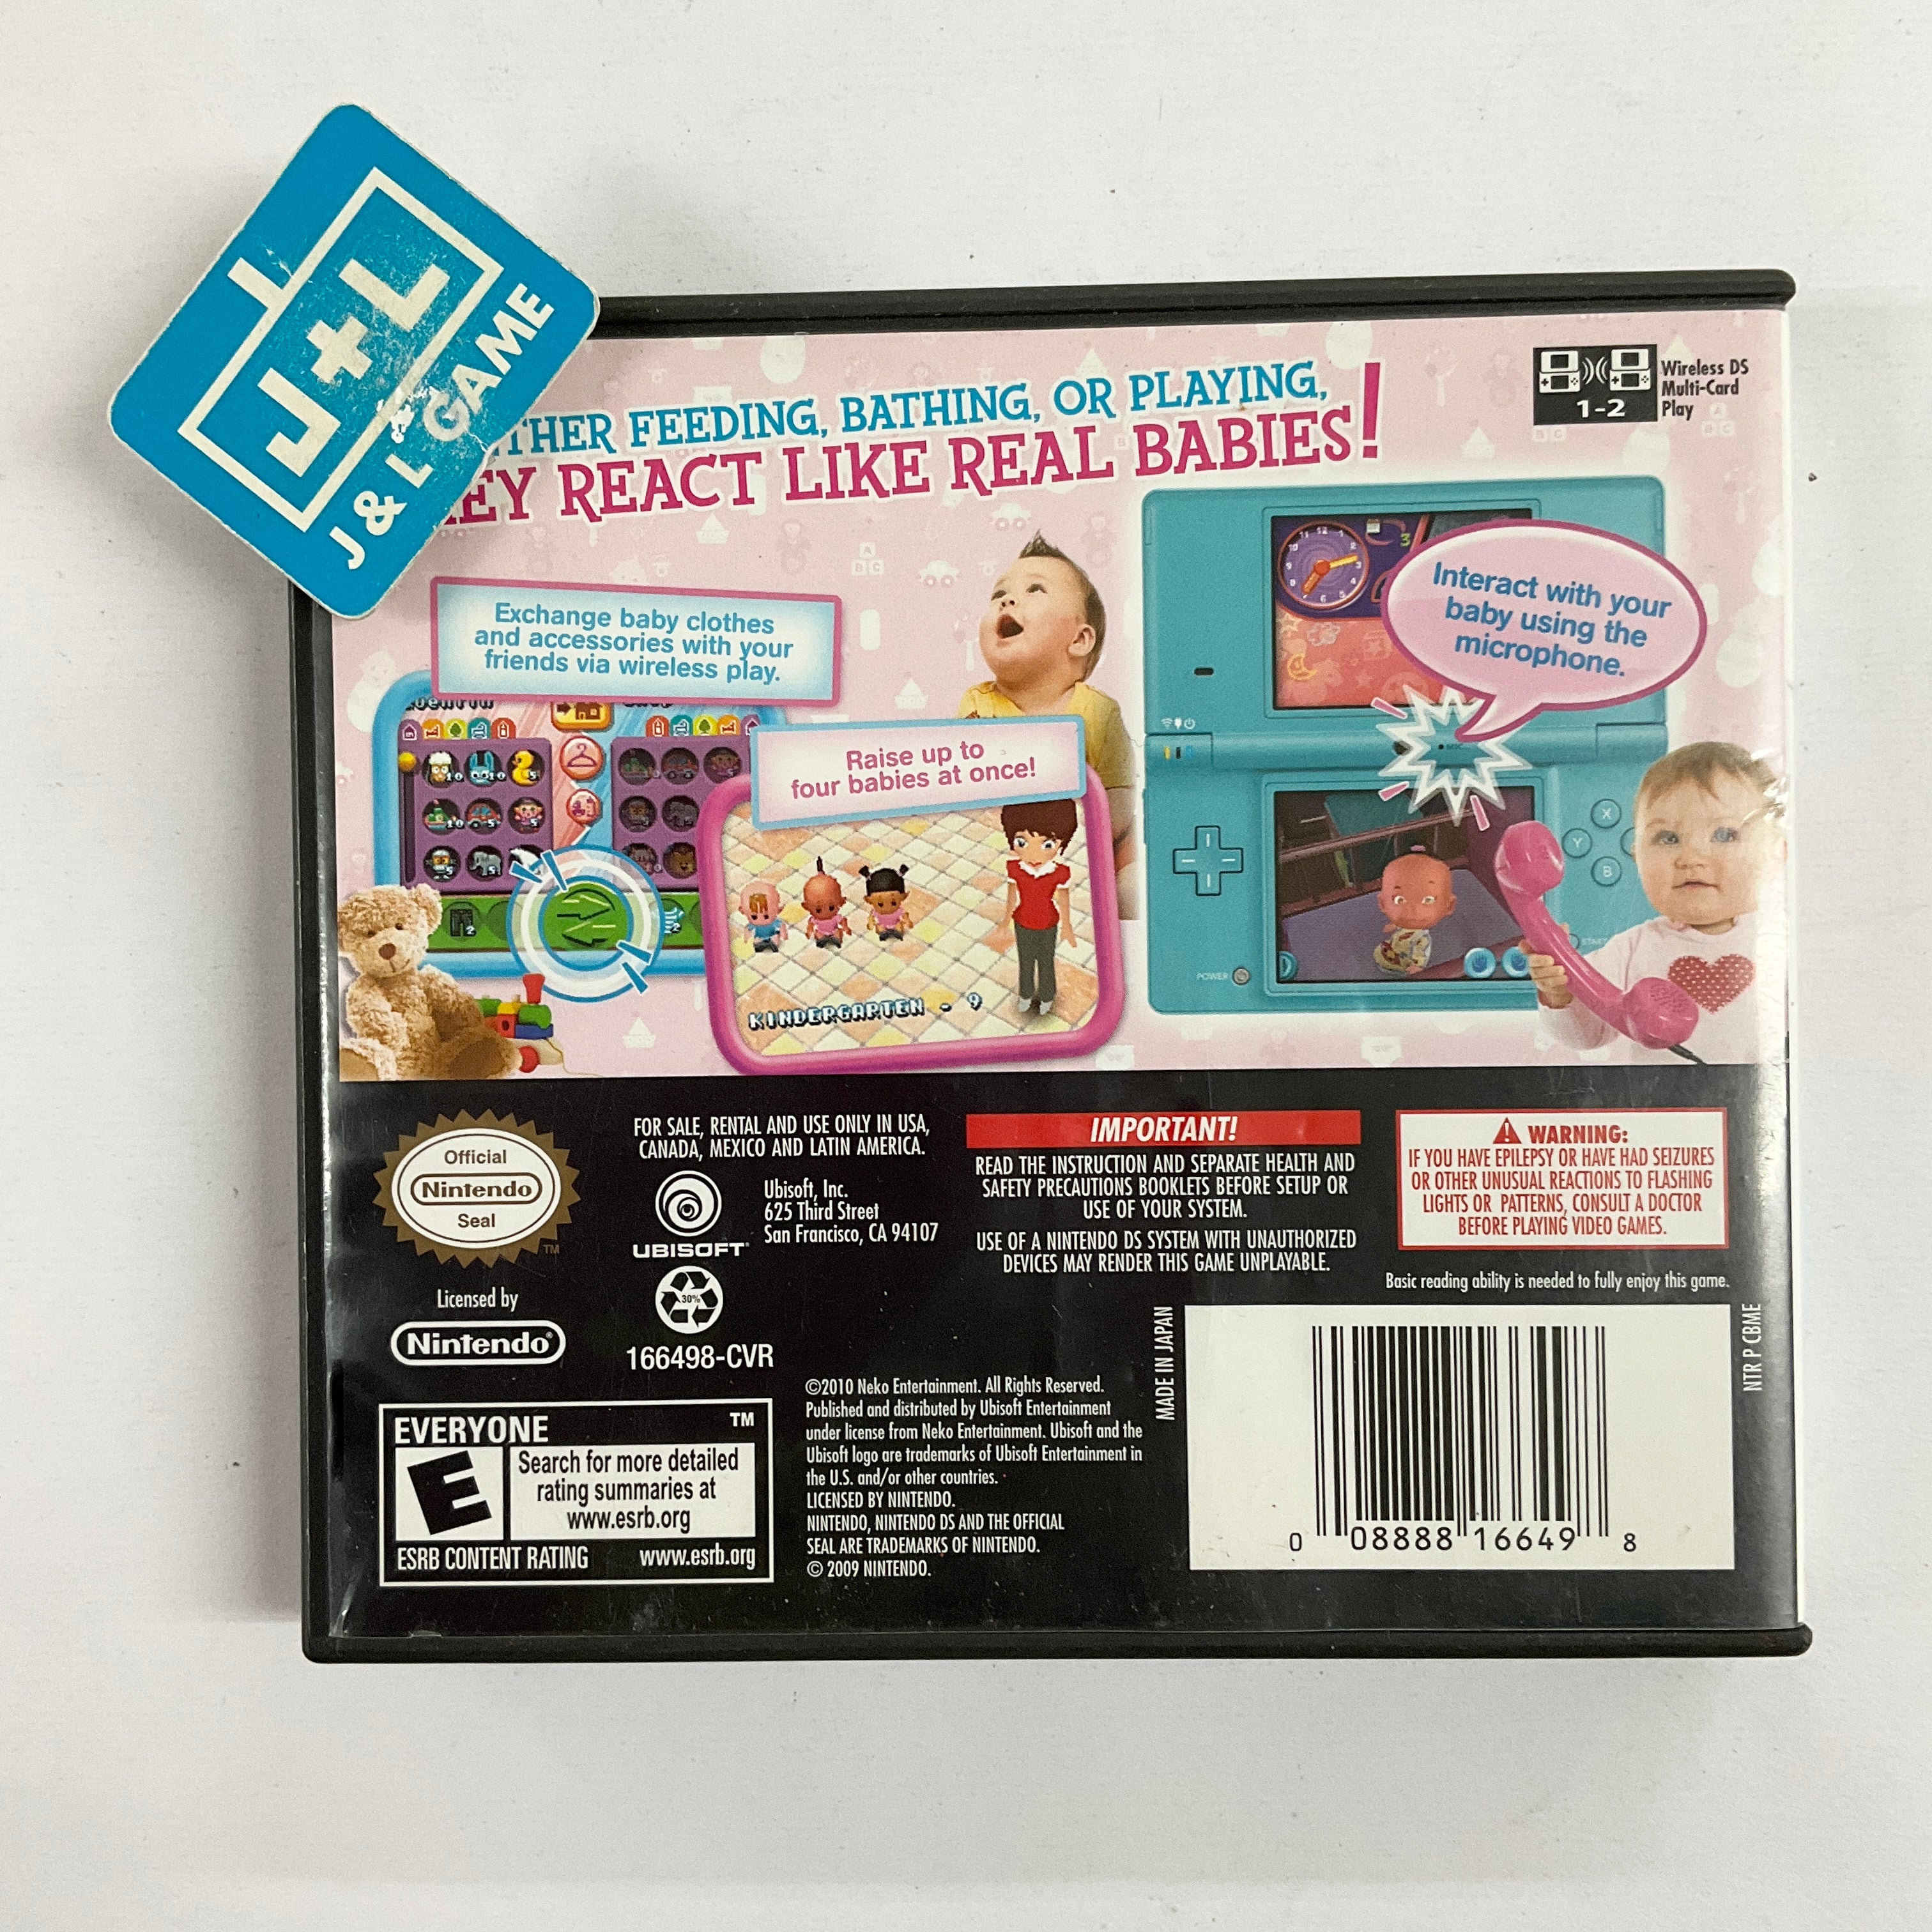 Baby Life - (NDS) Nintendo DS [Pre-Owned] Video Games Ubisoft   